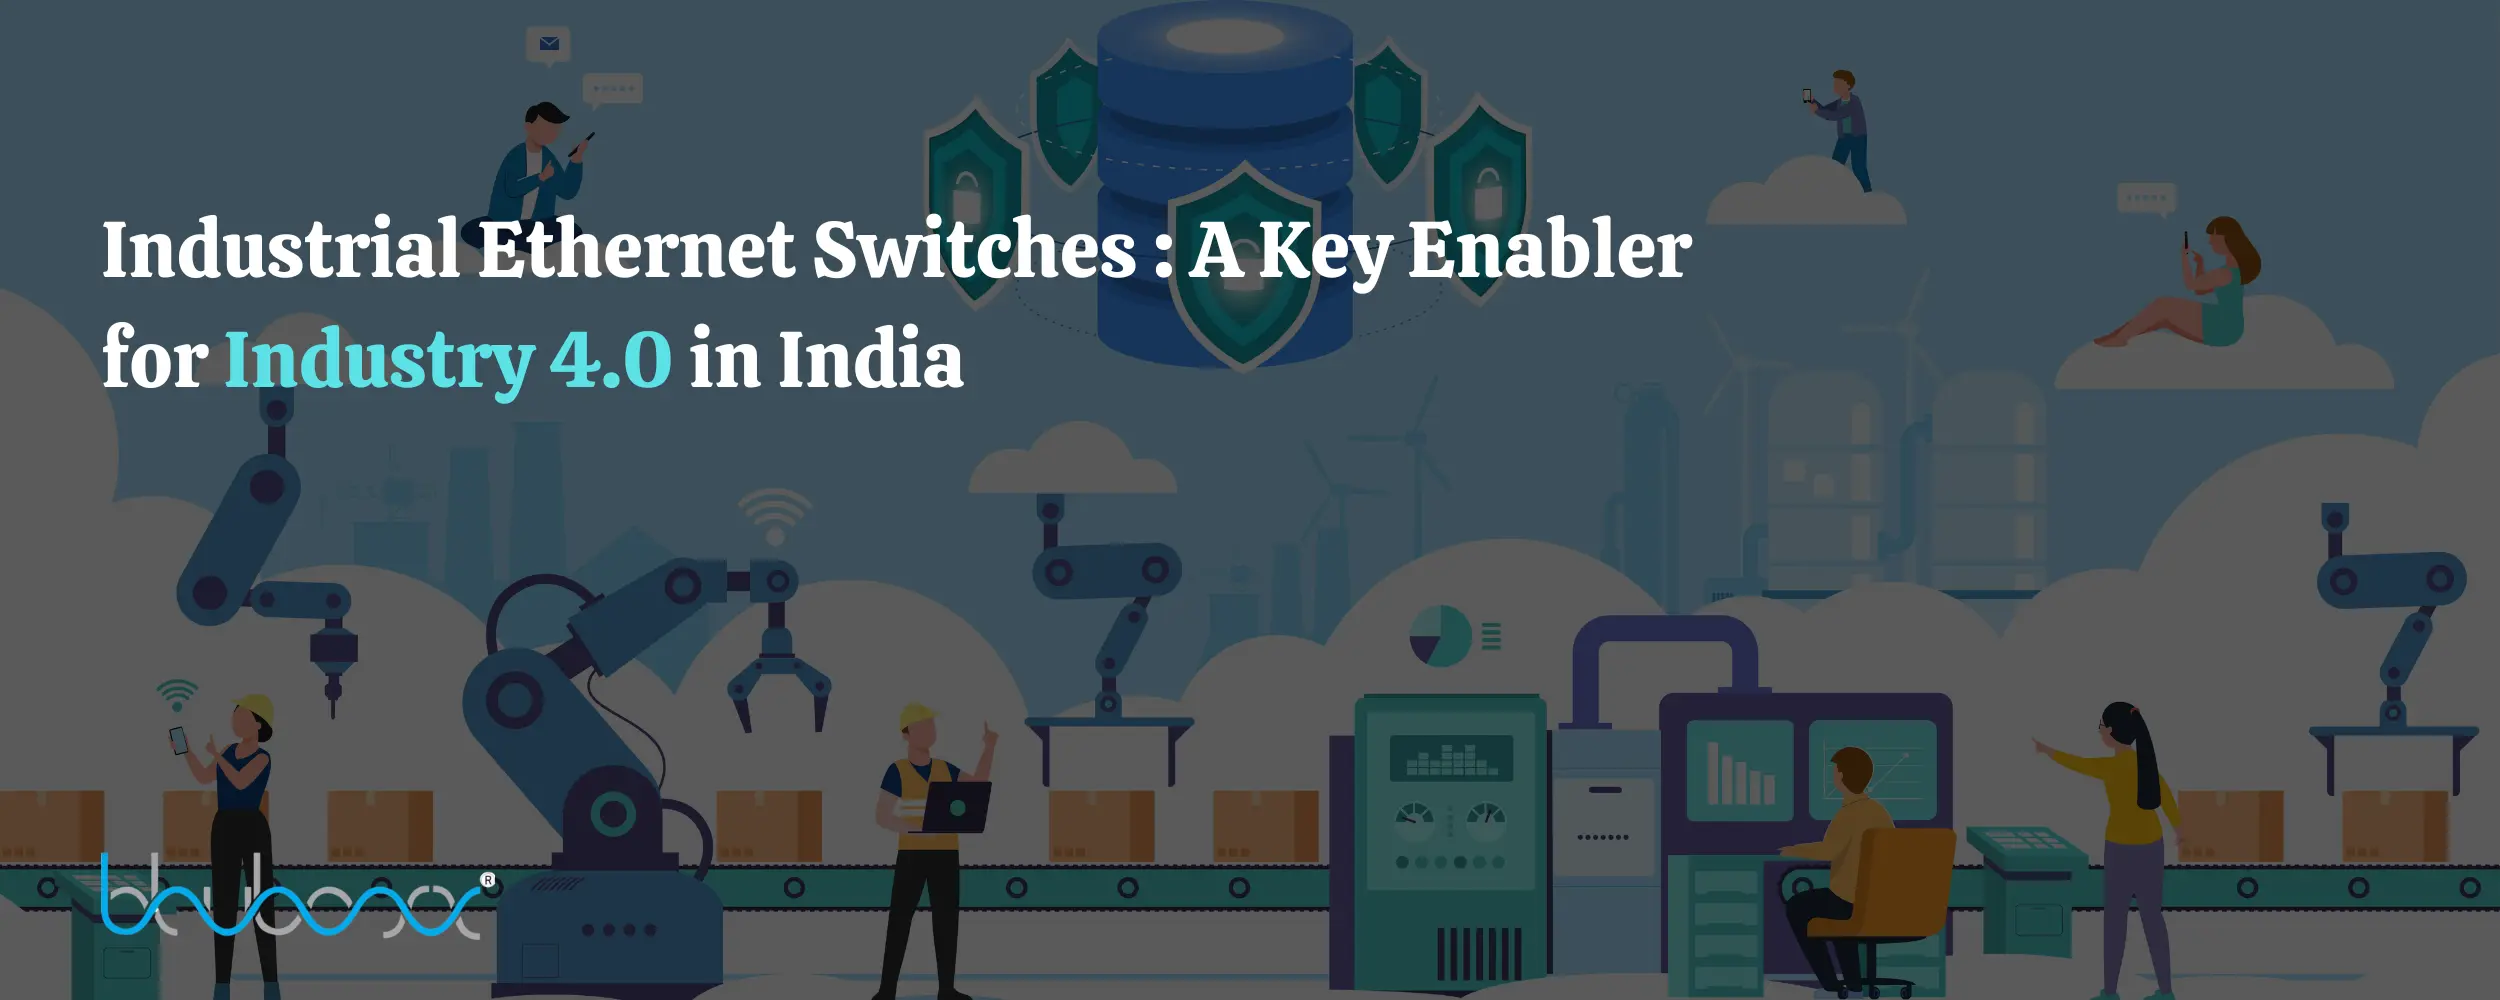 Industrial Ethernet Switches: A Key Enabler for Industry 4.0 in India